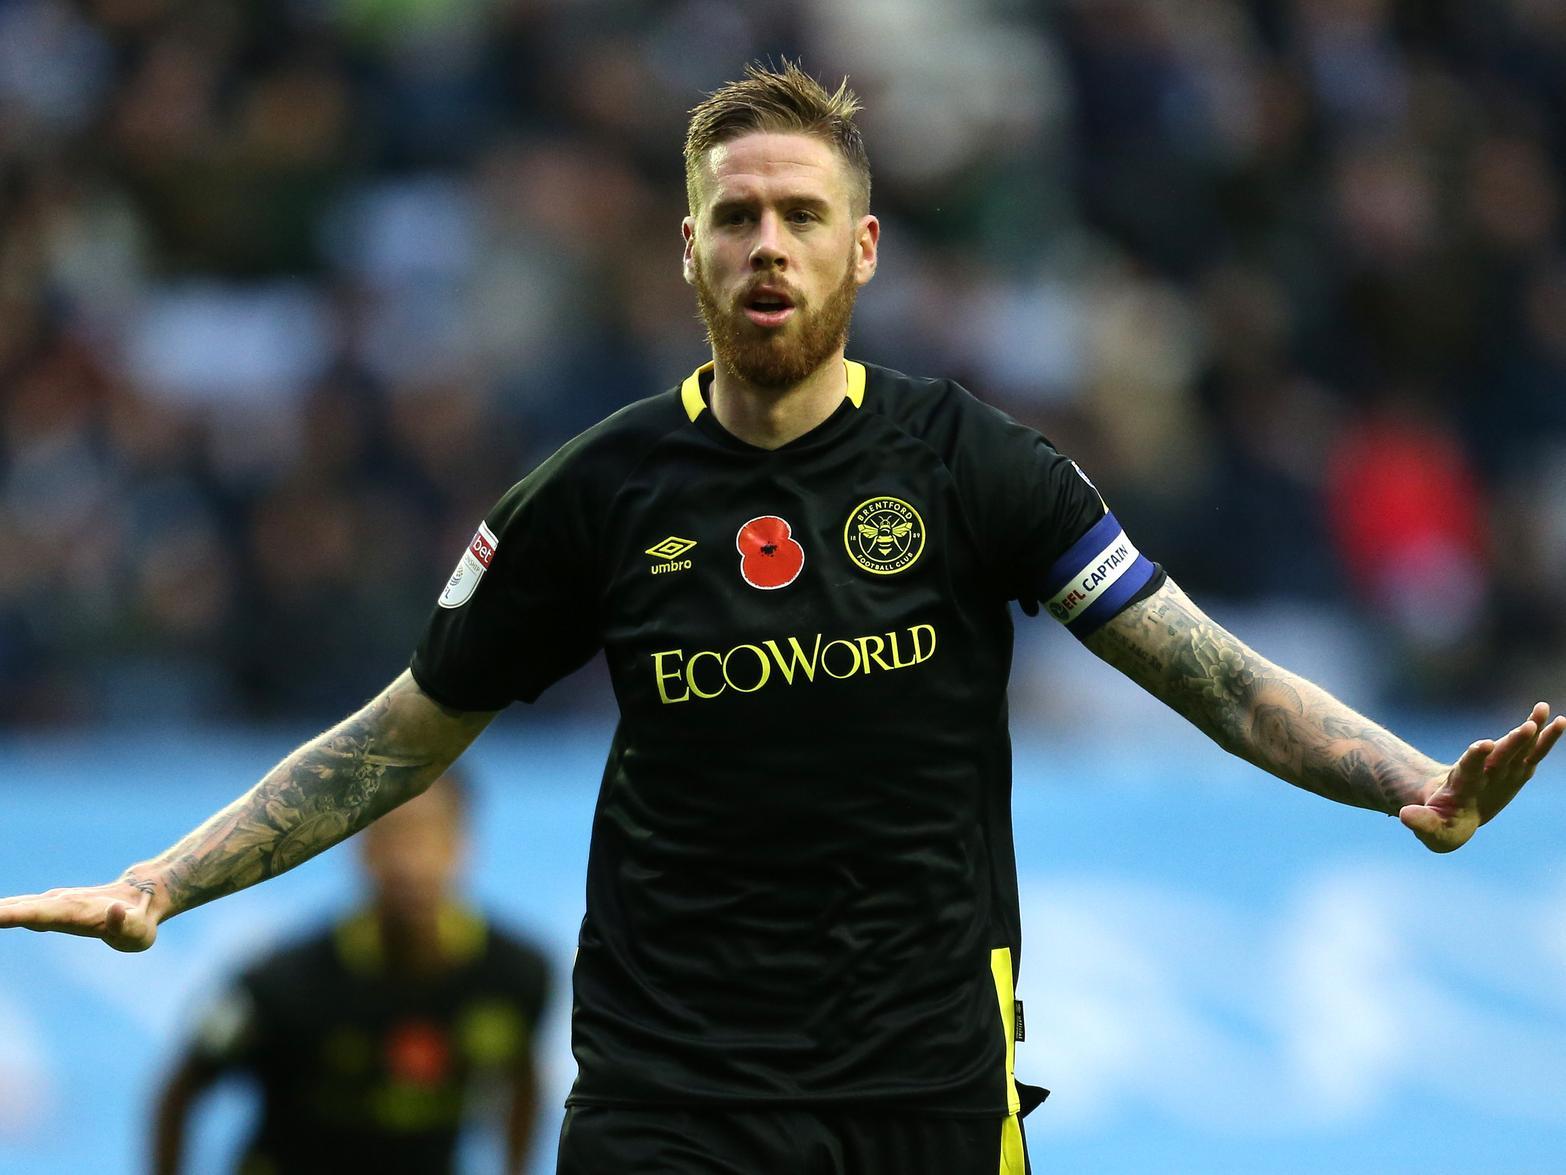 Brentford skipper Pontus Jansson has been forced out of Sweden's preparations from their match against Romania with a foot injury, and his club are sweating over the extent of the damage. (Sport Witness)